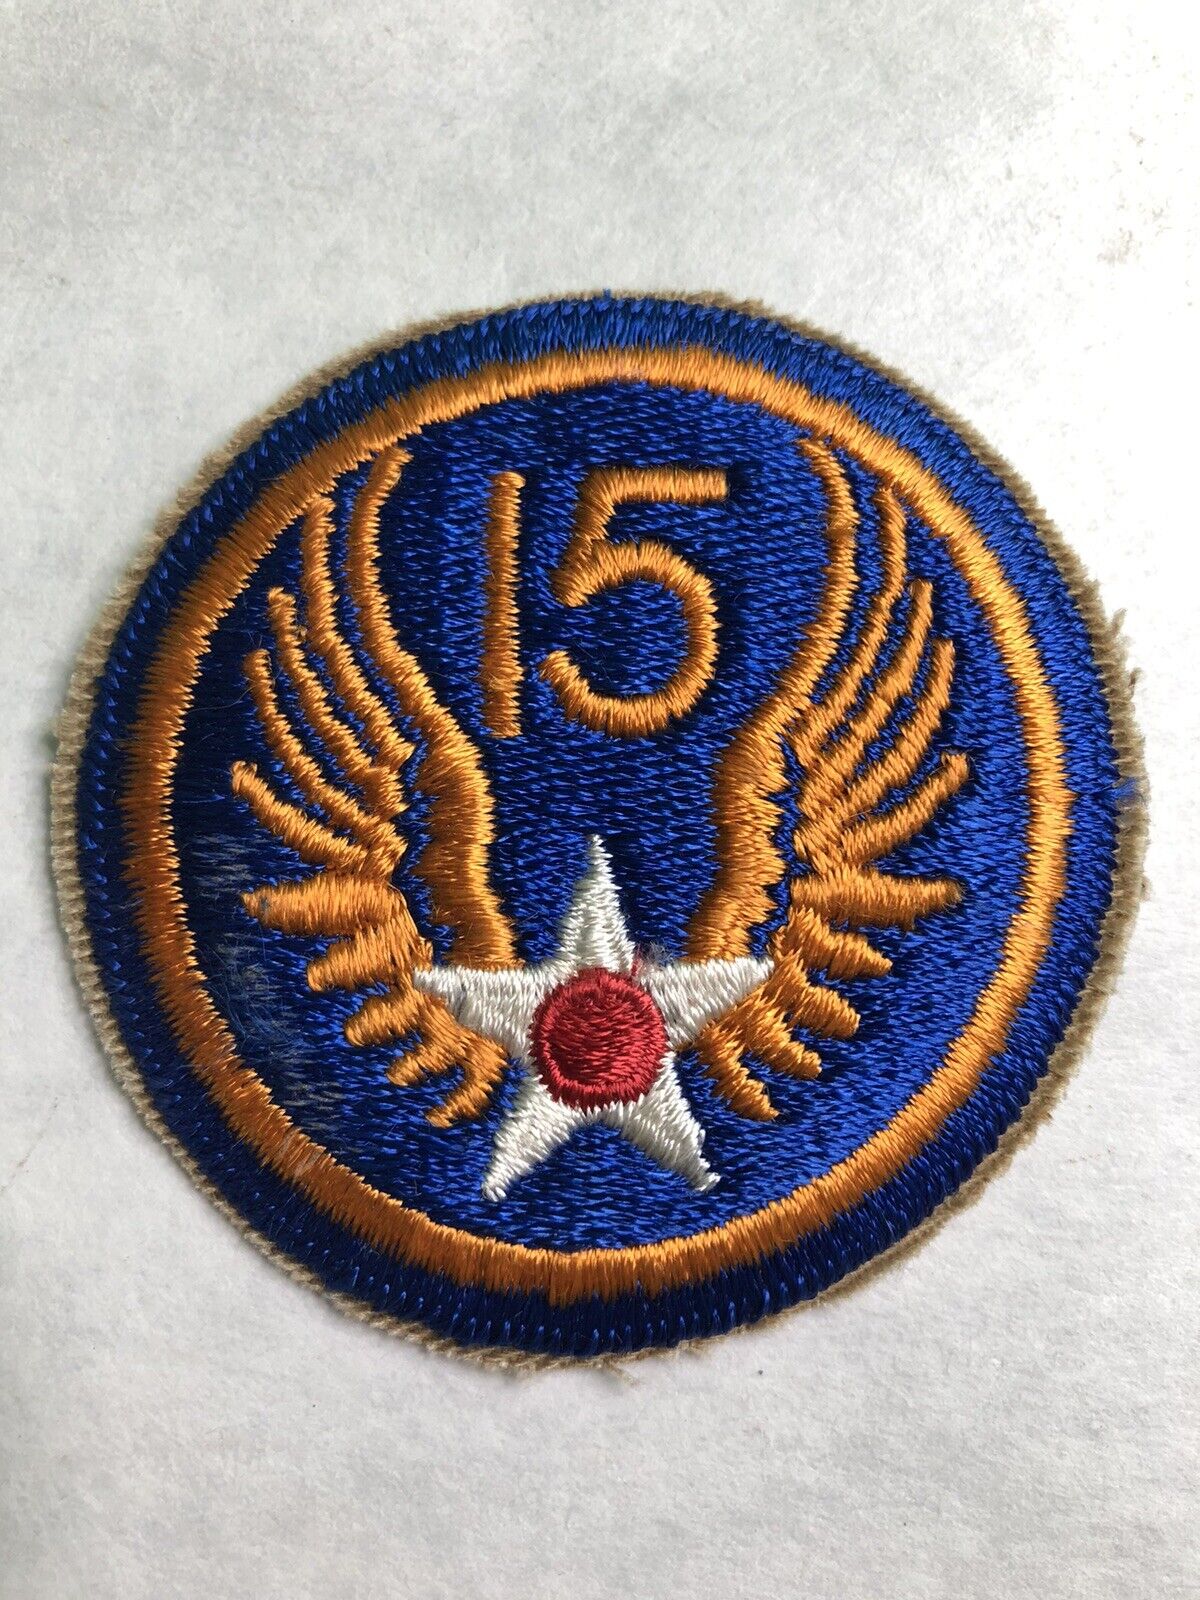 Vintage WWII 15th US Army Air Force Military 15th Patch